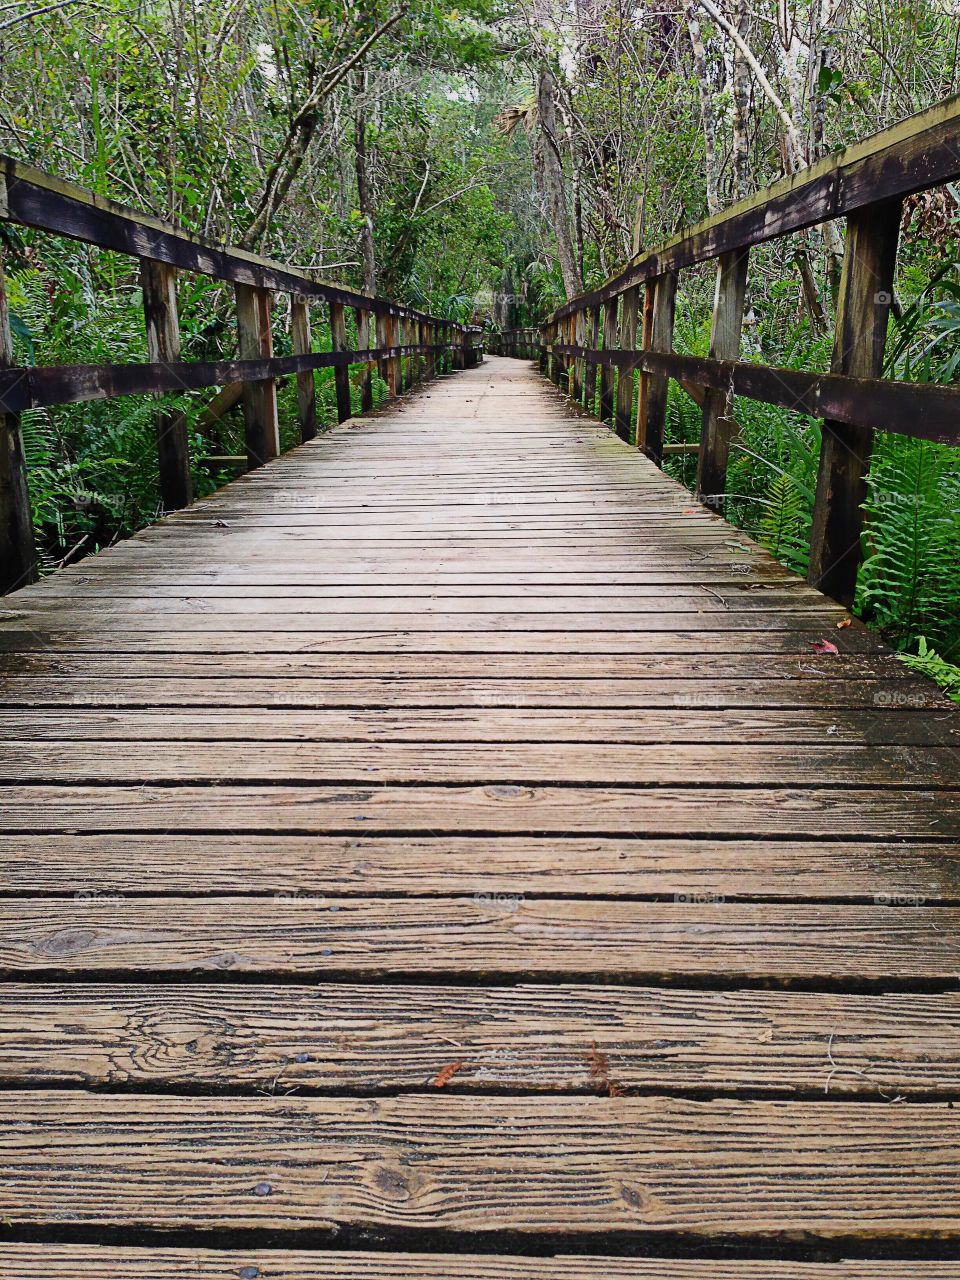 Boardwalk in the wilderness inviting you into a tropical forest.